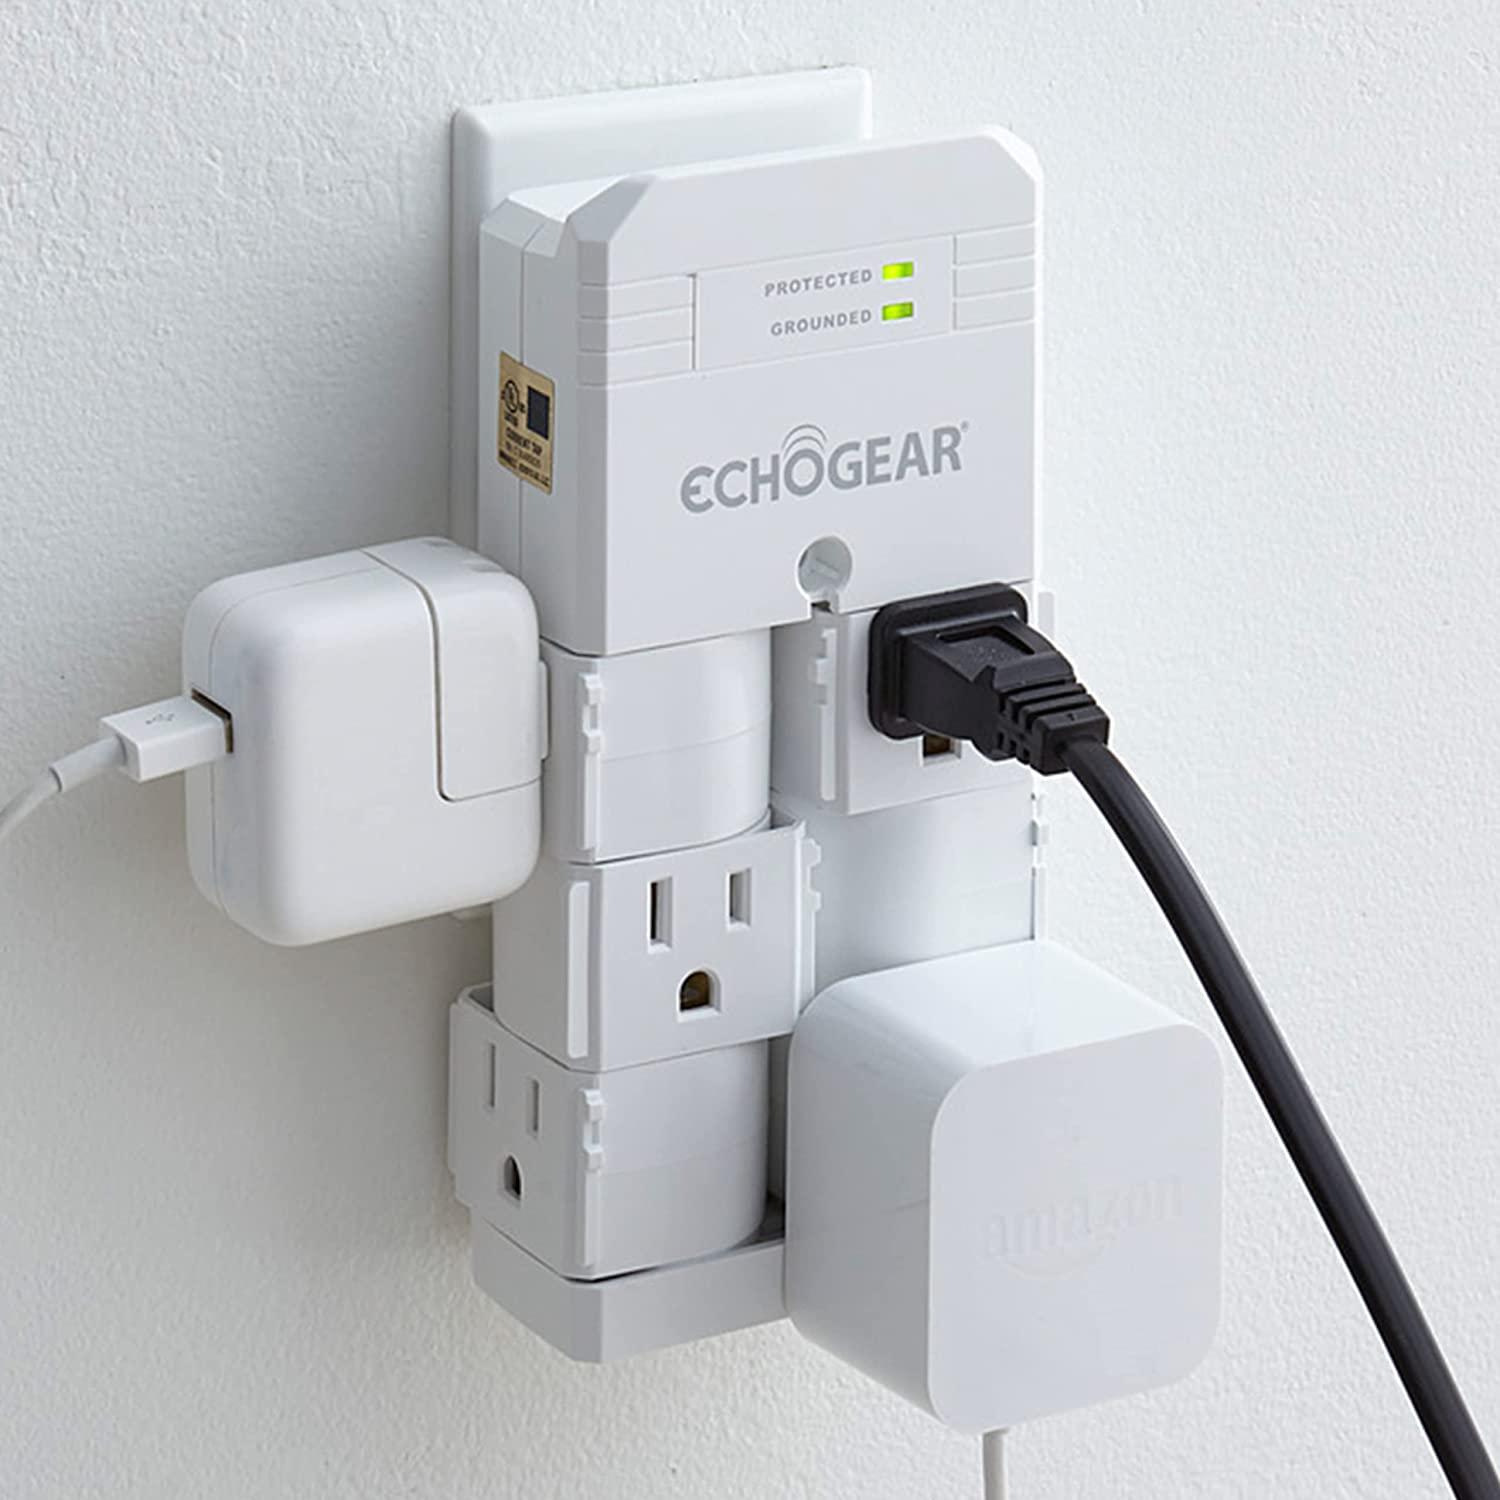 Echogear On-Wall Surge Protector with Pivoting AC Outlets for $9.99